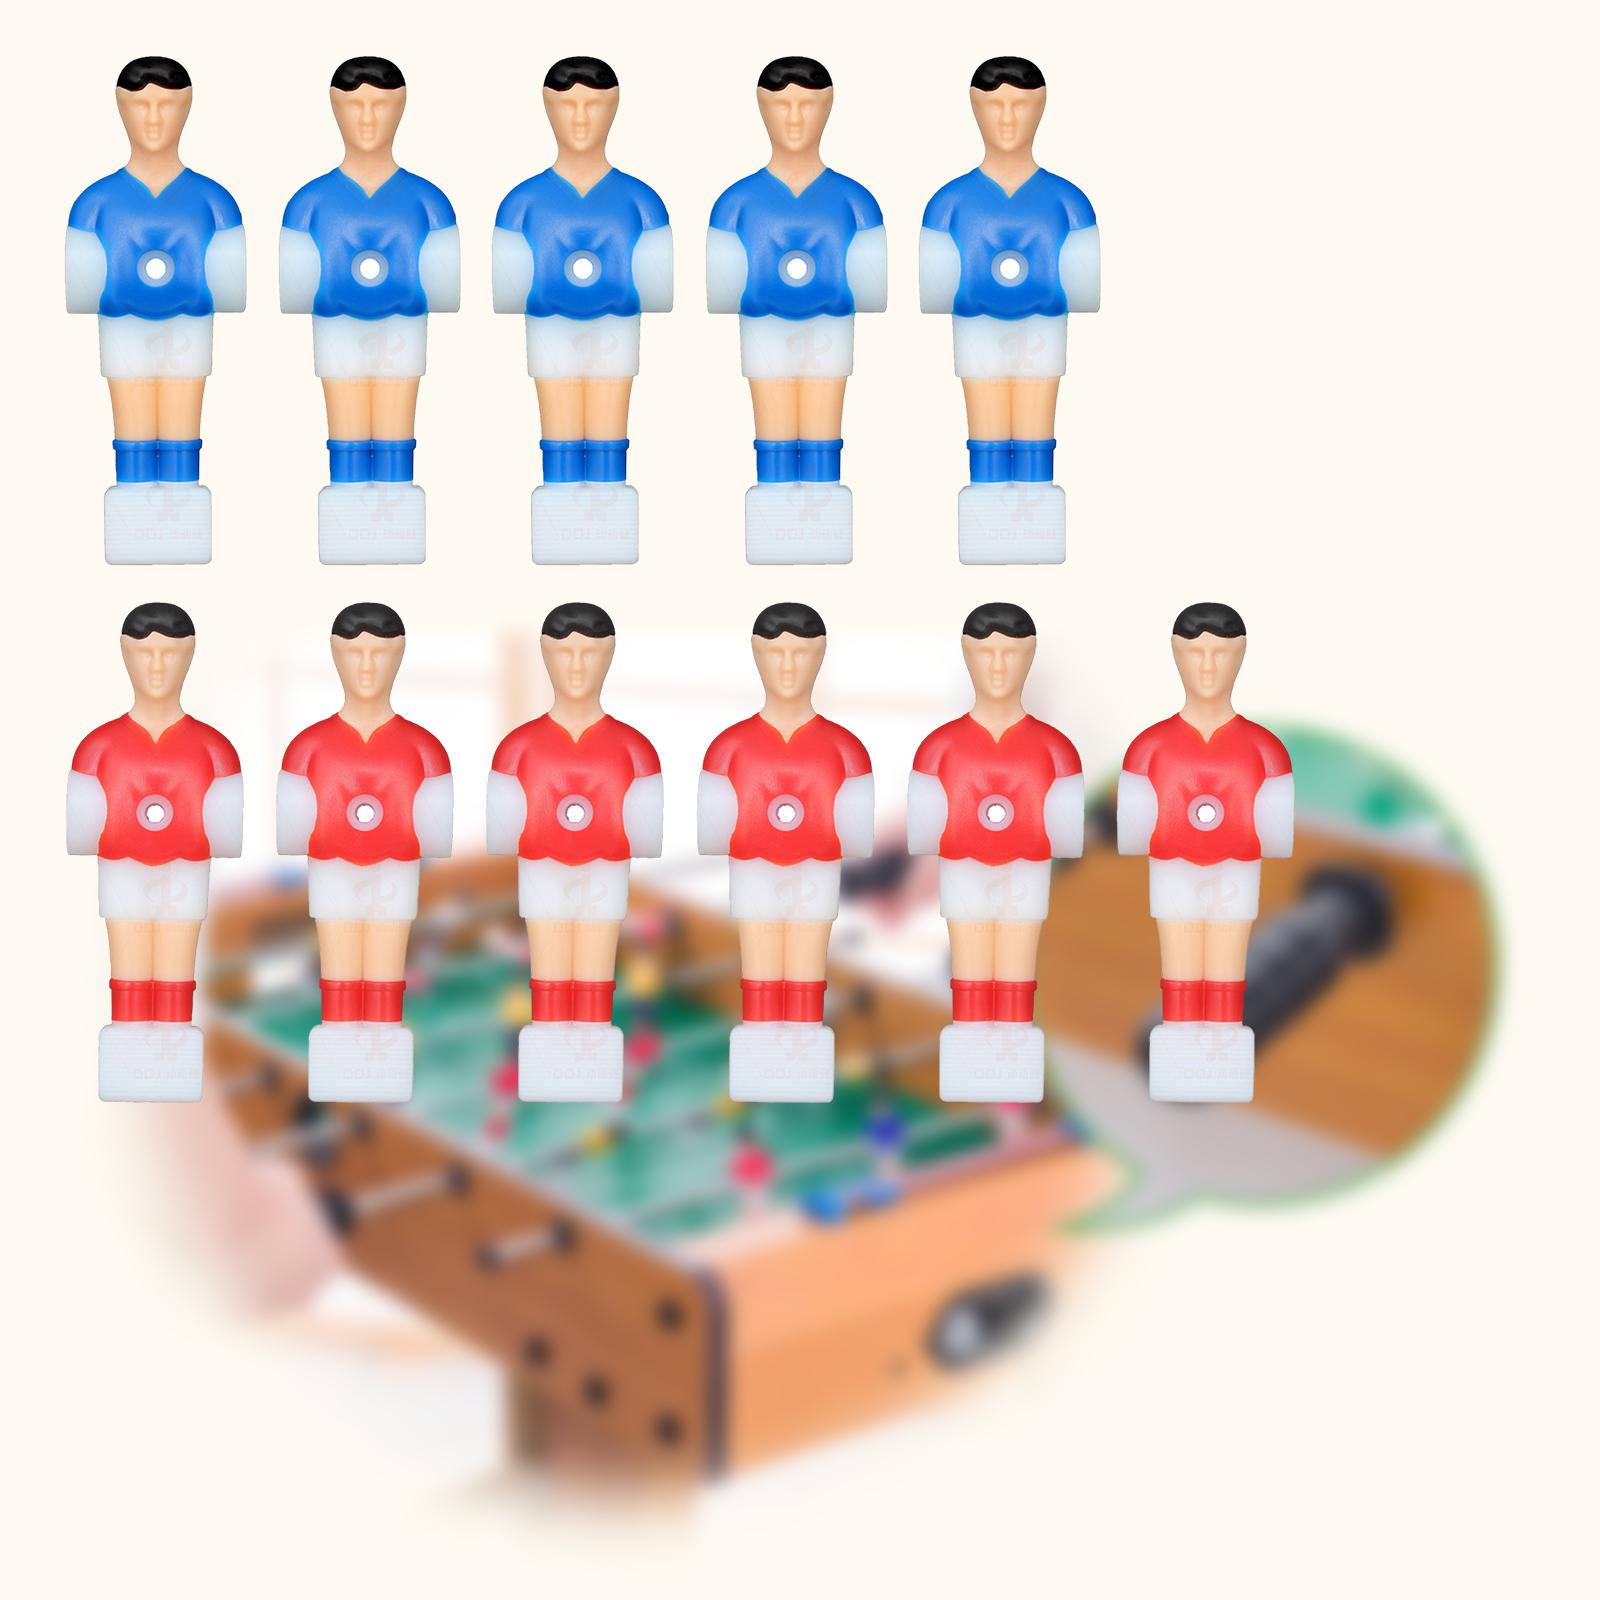 11x Foosball Men Football Players Figures Table Foosball Player Replacement